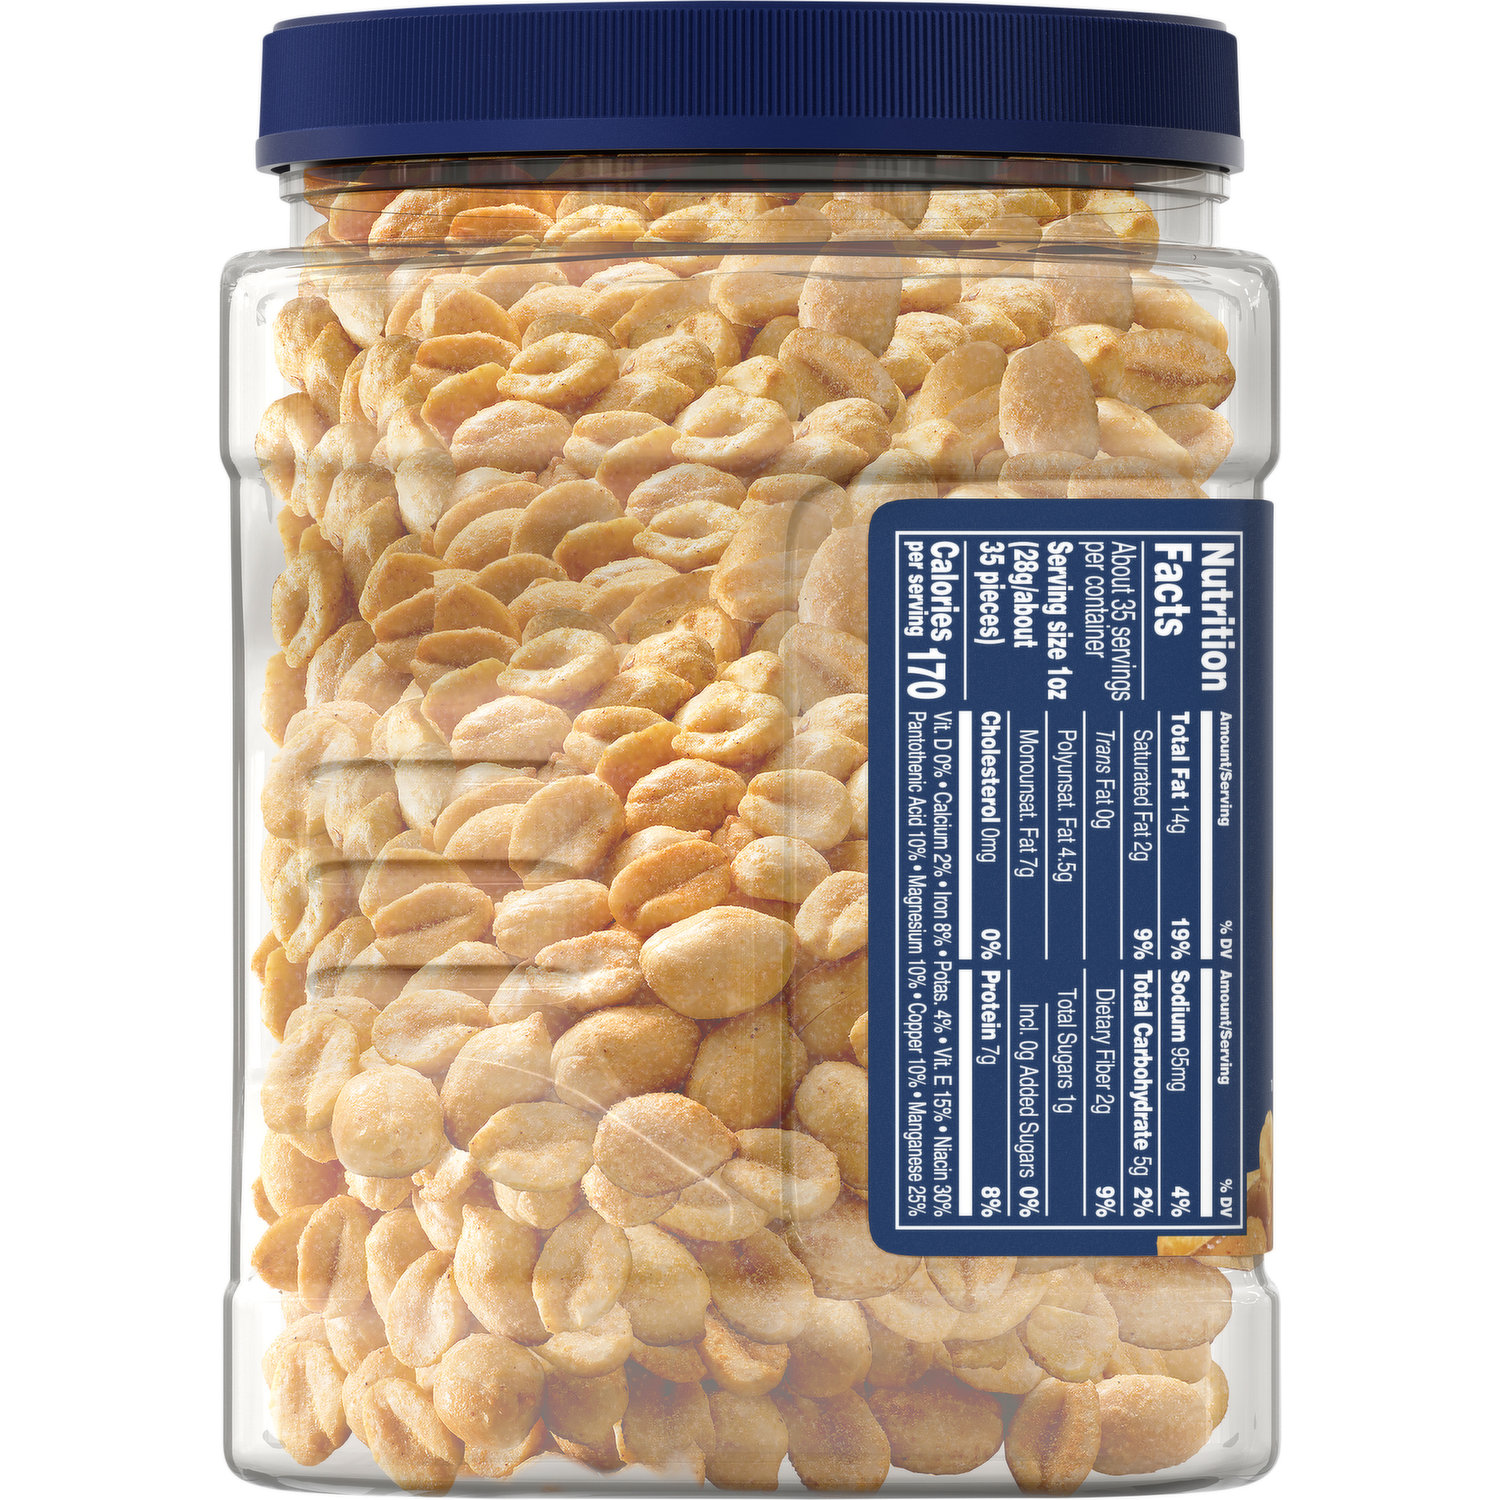 Planters Cocktail Peanuts, Salted - Smart & Final